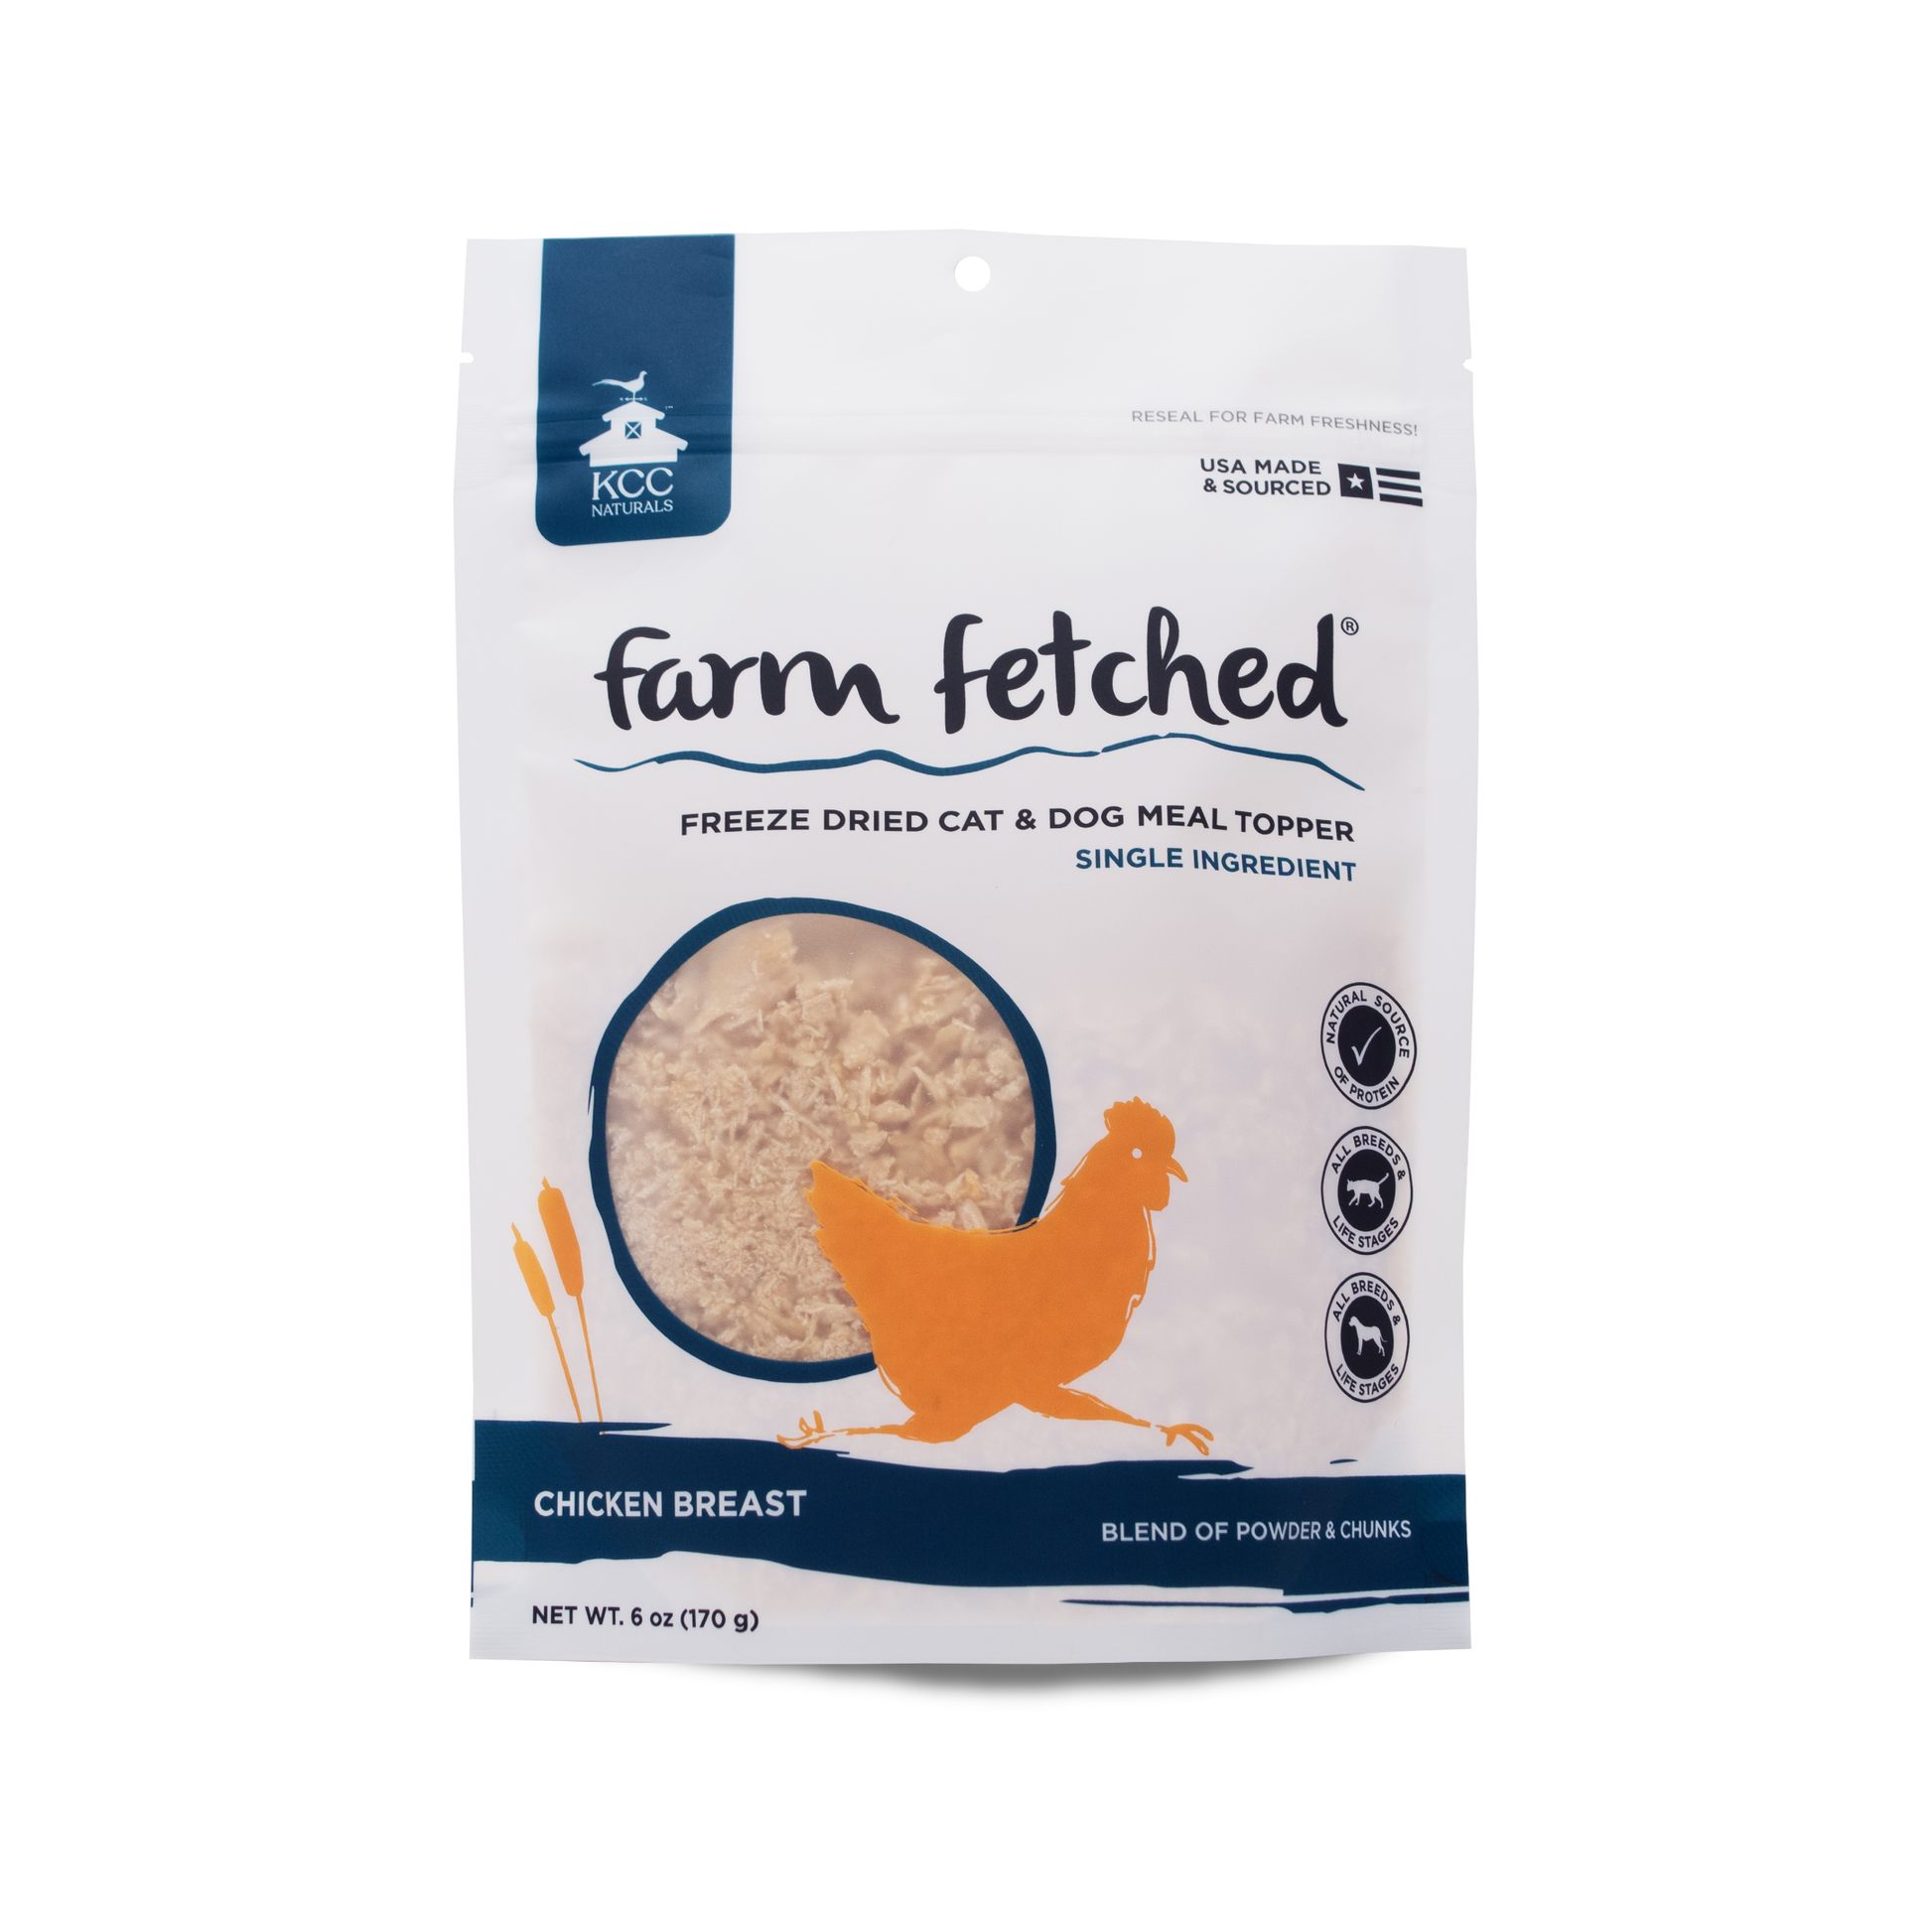 chicken breast meal topper package front